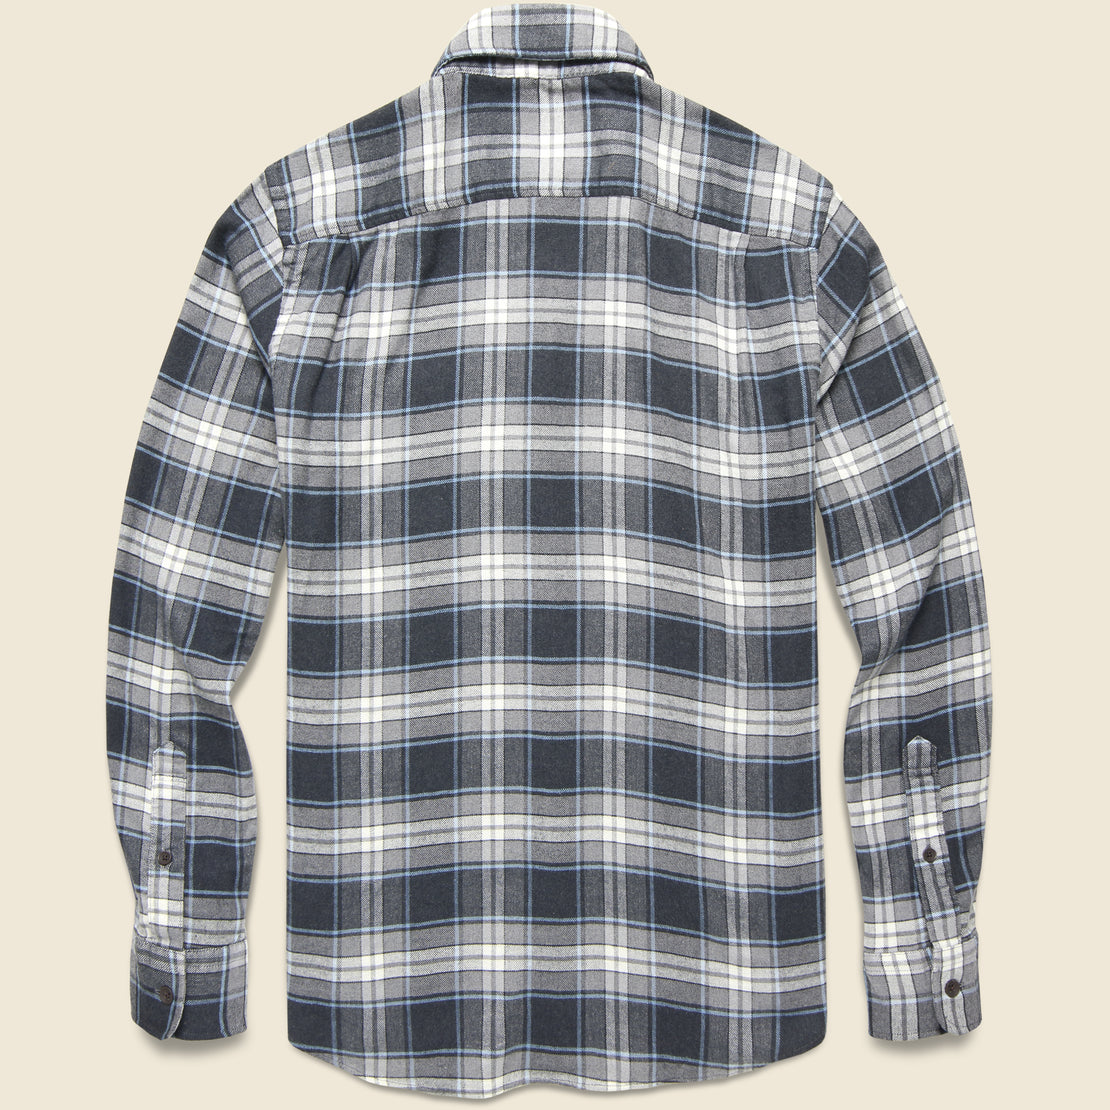 Movement Flannel - Polar Night Plaid - Faherty - STAG Provisions - Tops - L/S Woven - Plaid